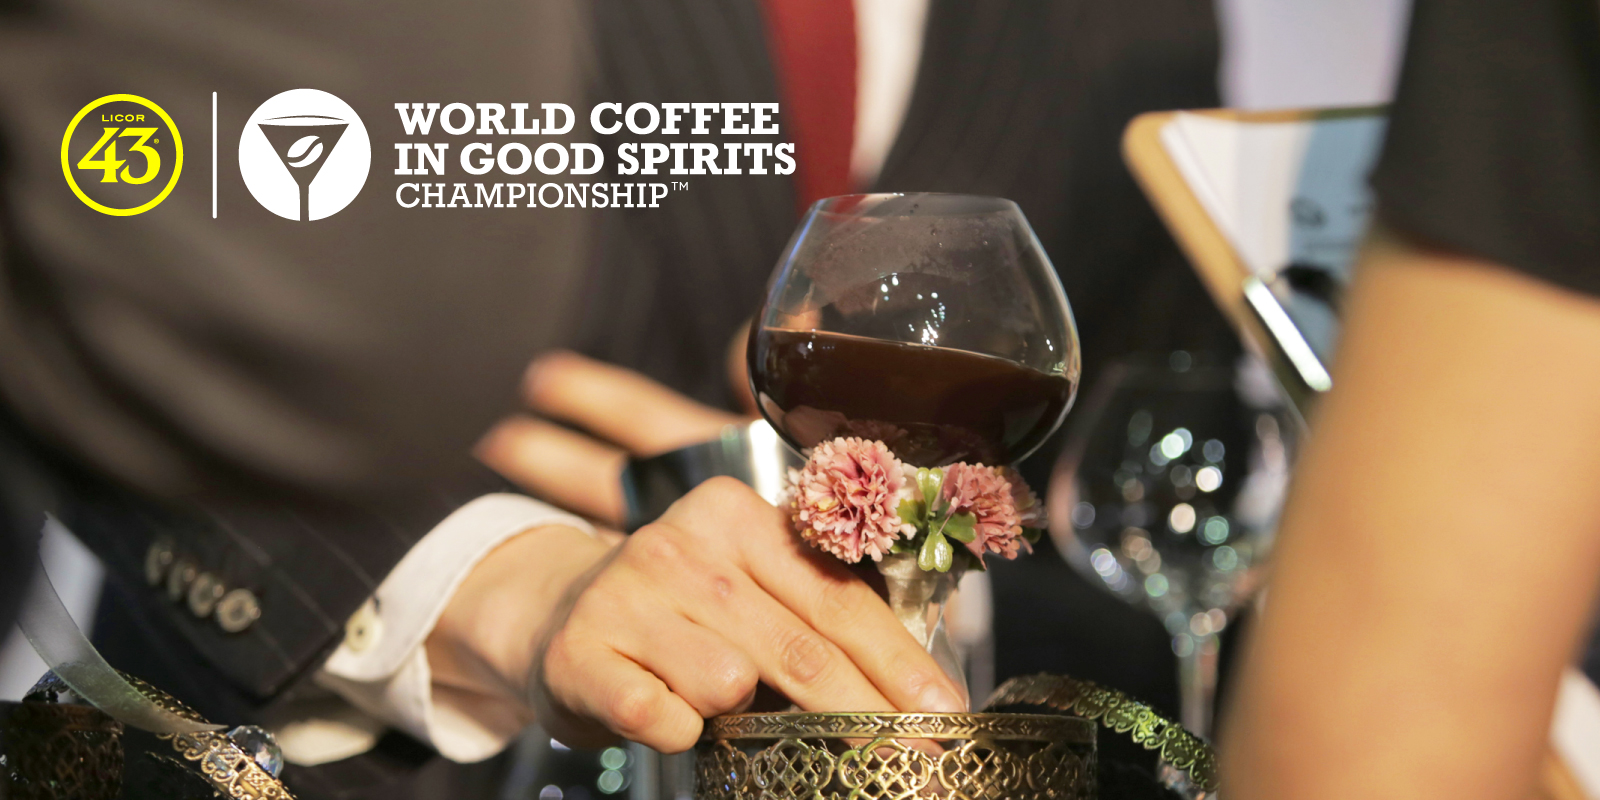 A squat piece of stemmed glassware decorated with dried flowers is served to a judge. There is a coffee cocktail in the cup. The image has the Licor 43 & World Coffee In Good Spirits Championships logos overlayed.